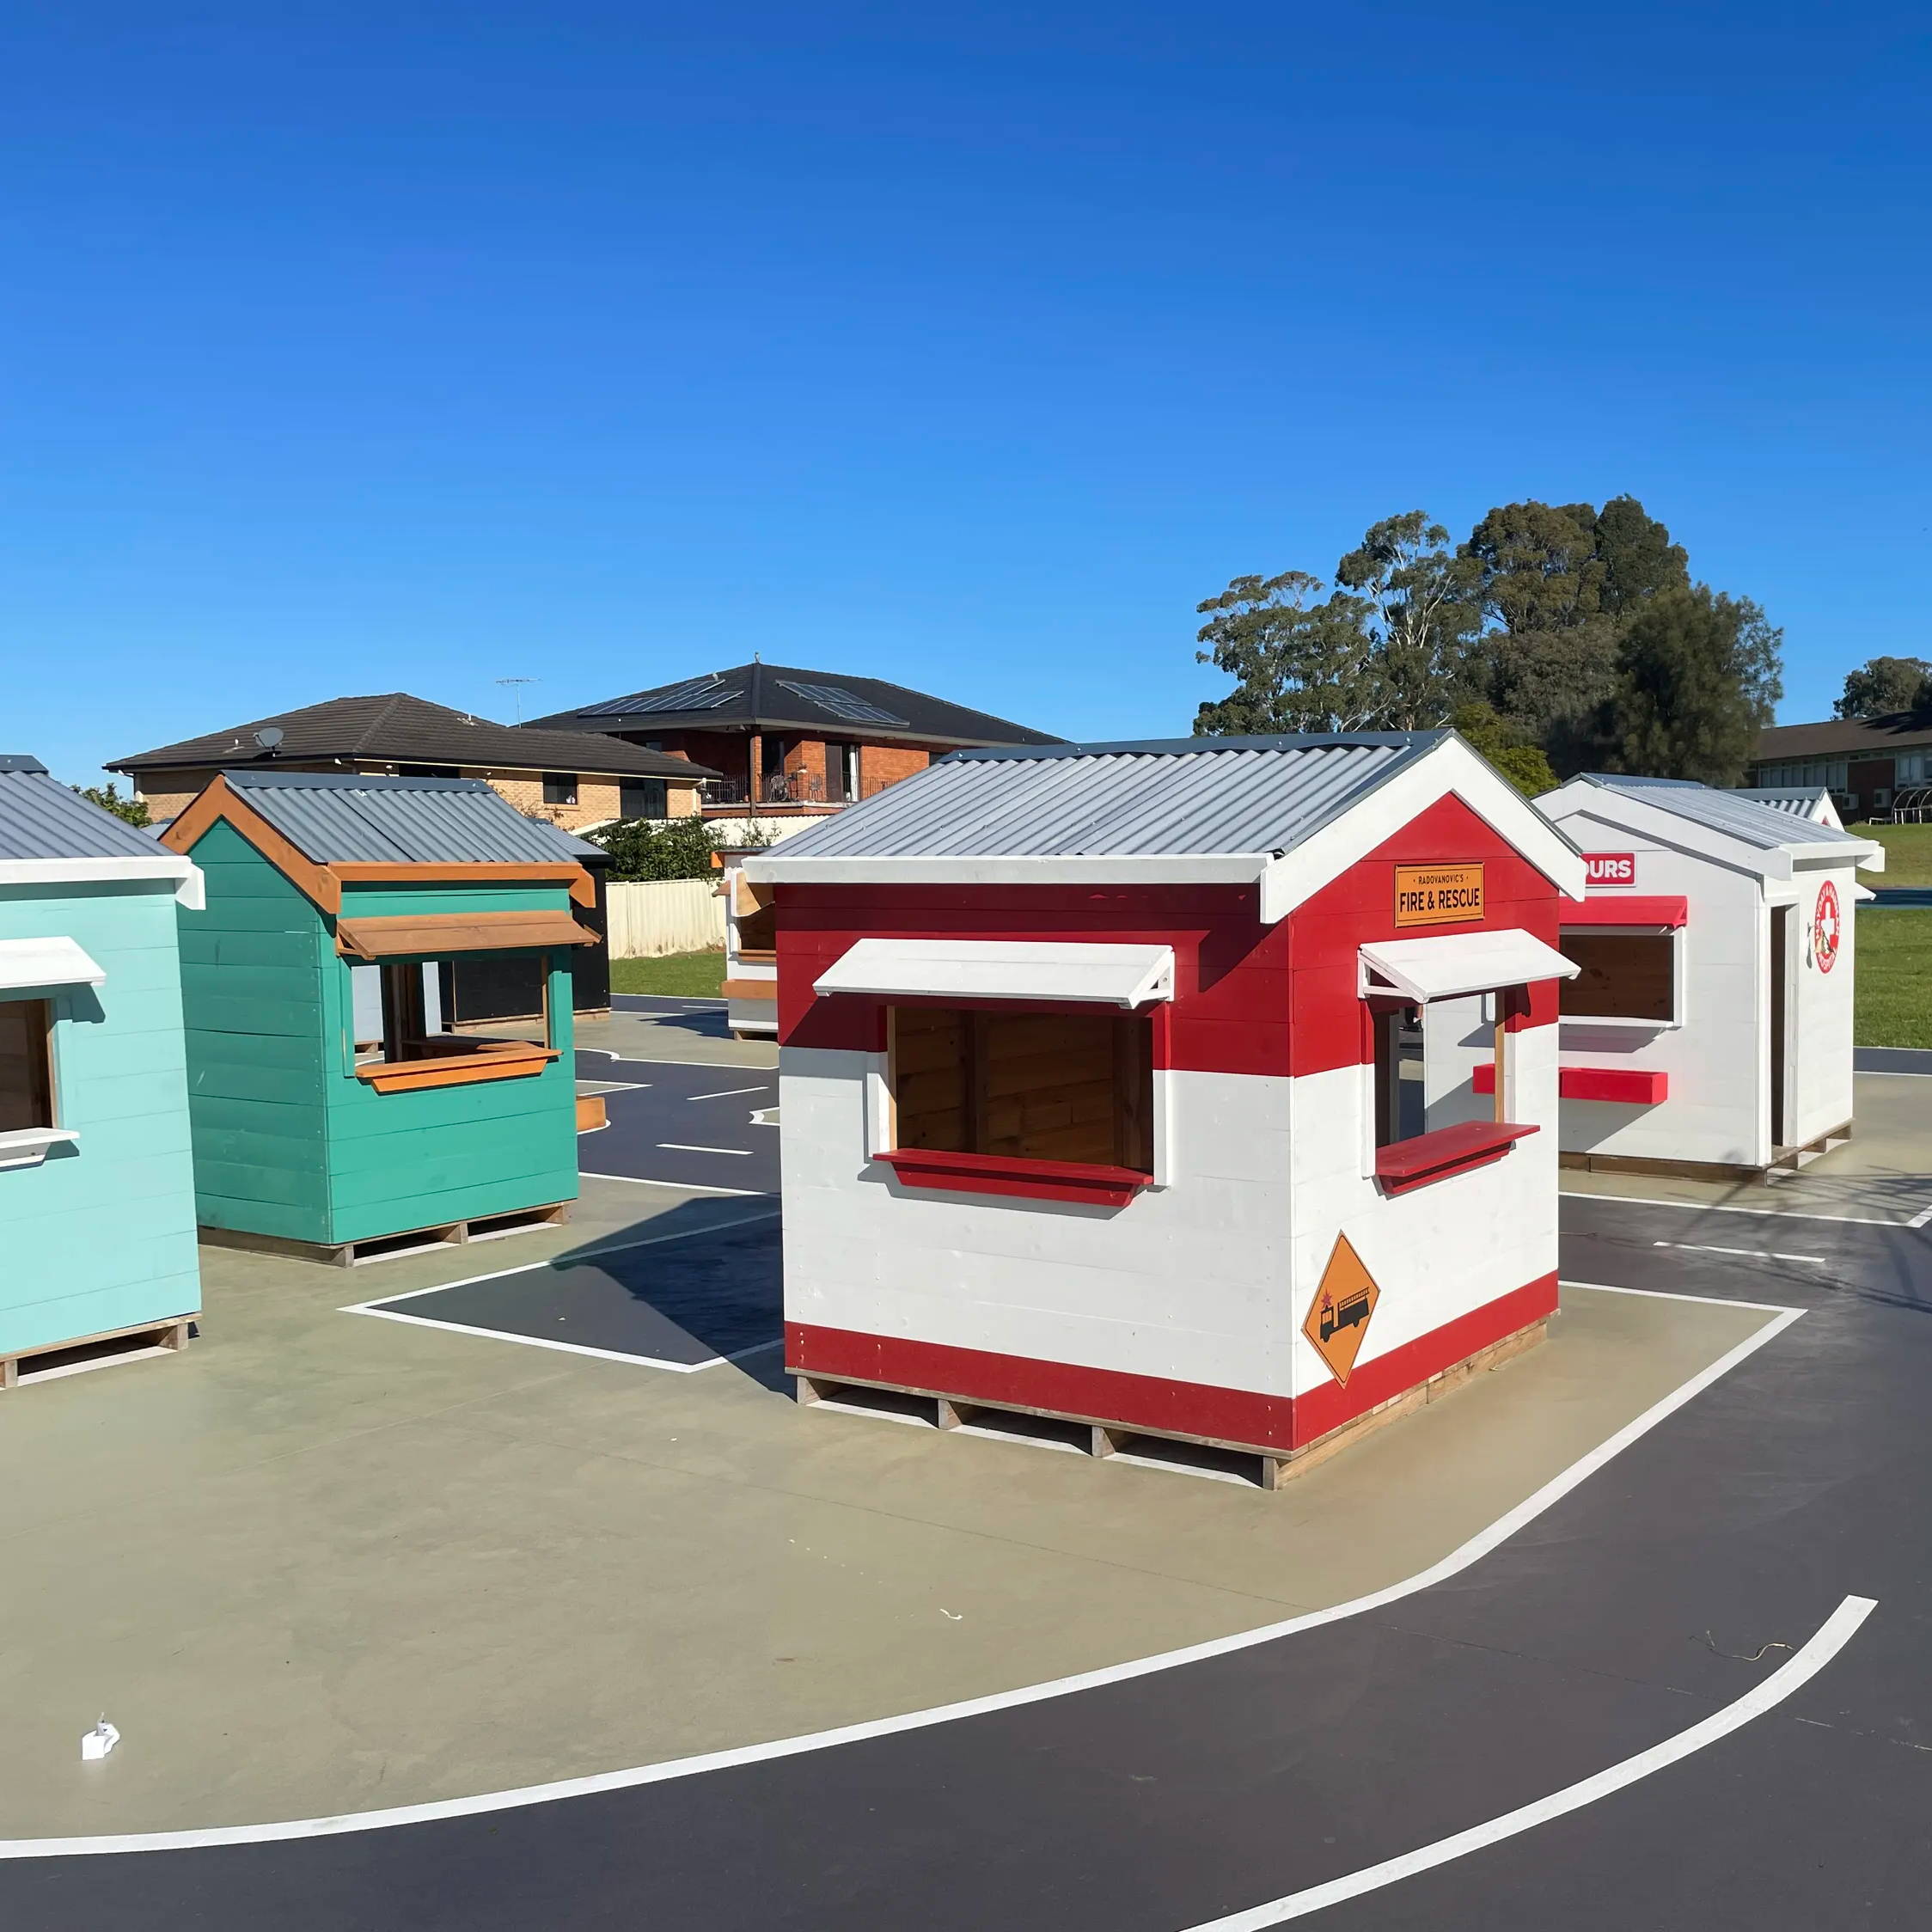 A cubby House village with a fire station, hospital, and drive through cubby house.